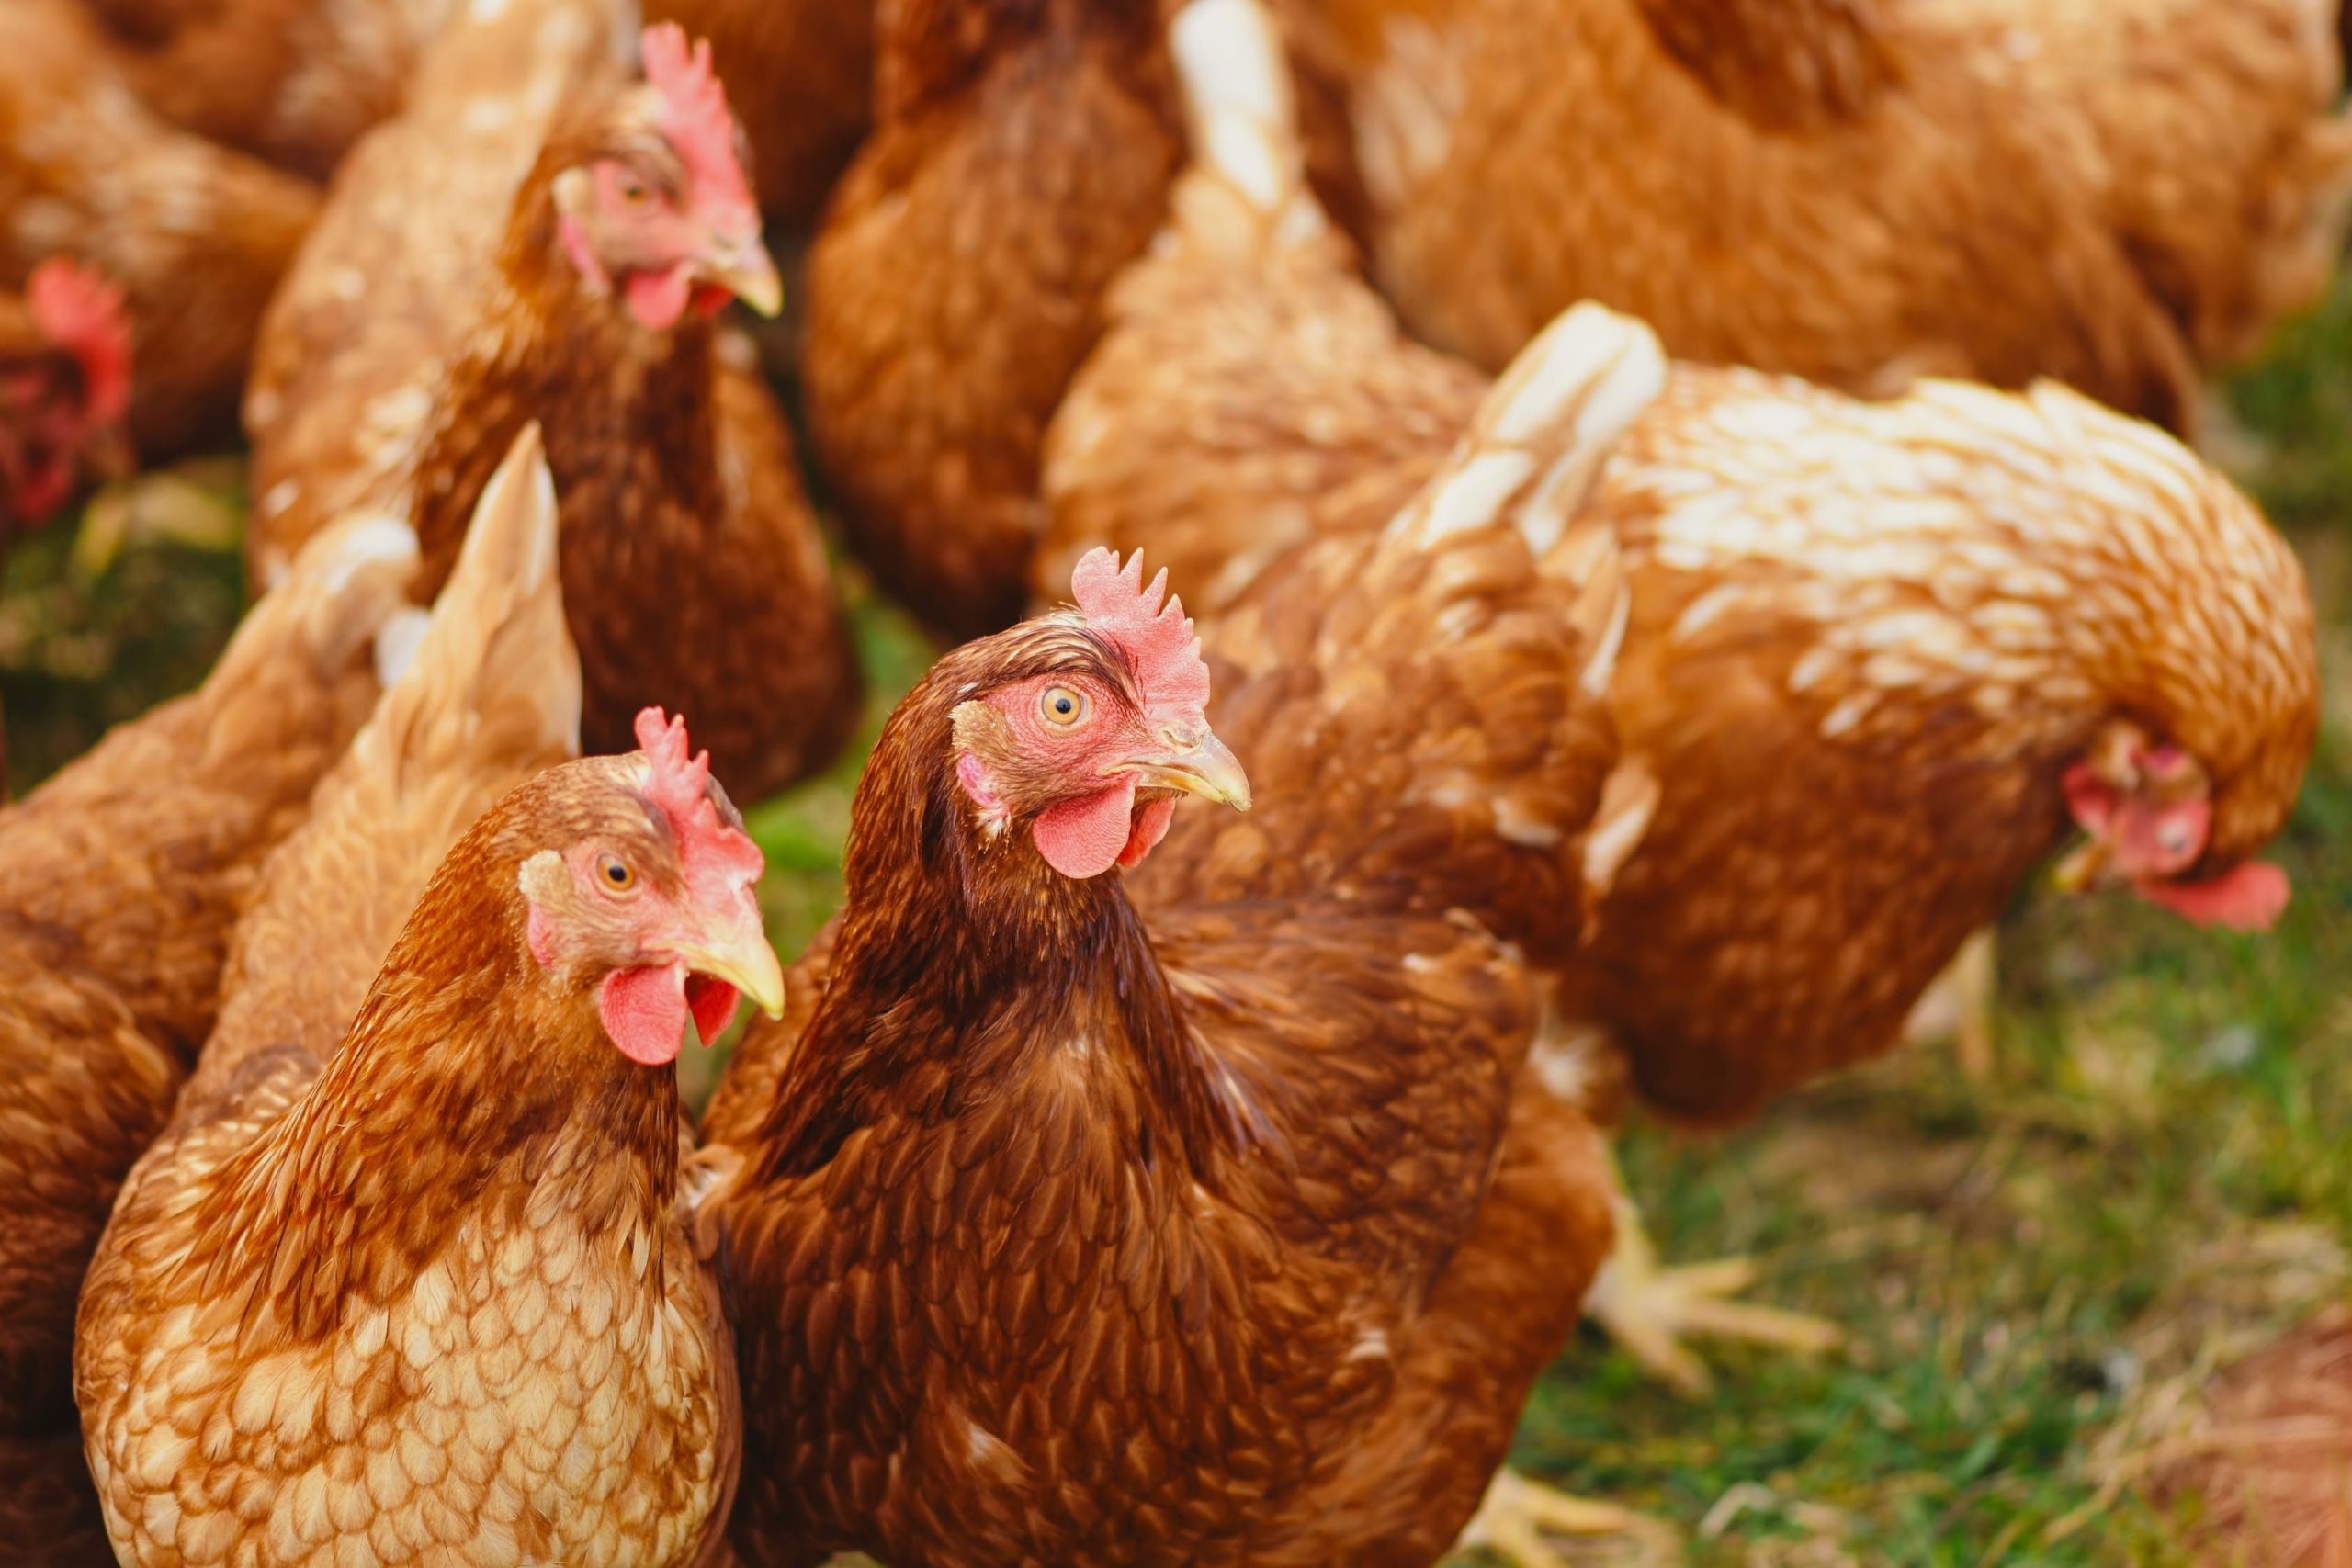 The Philippines bans import of poultry products from Denmark and Sweden